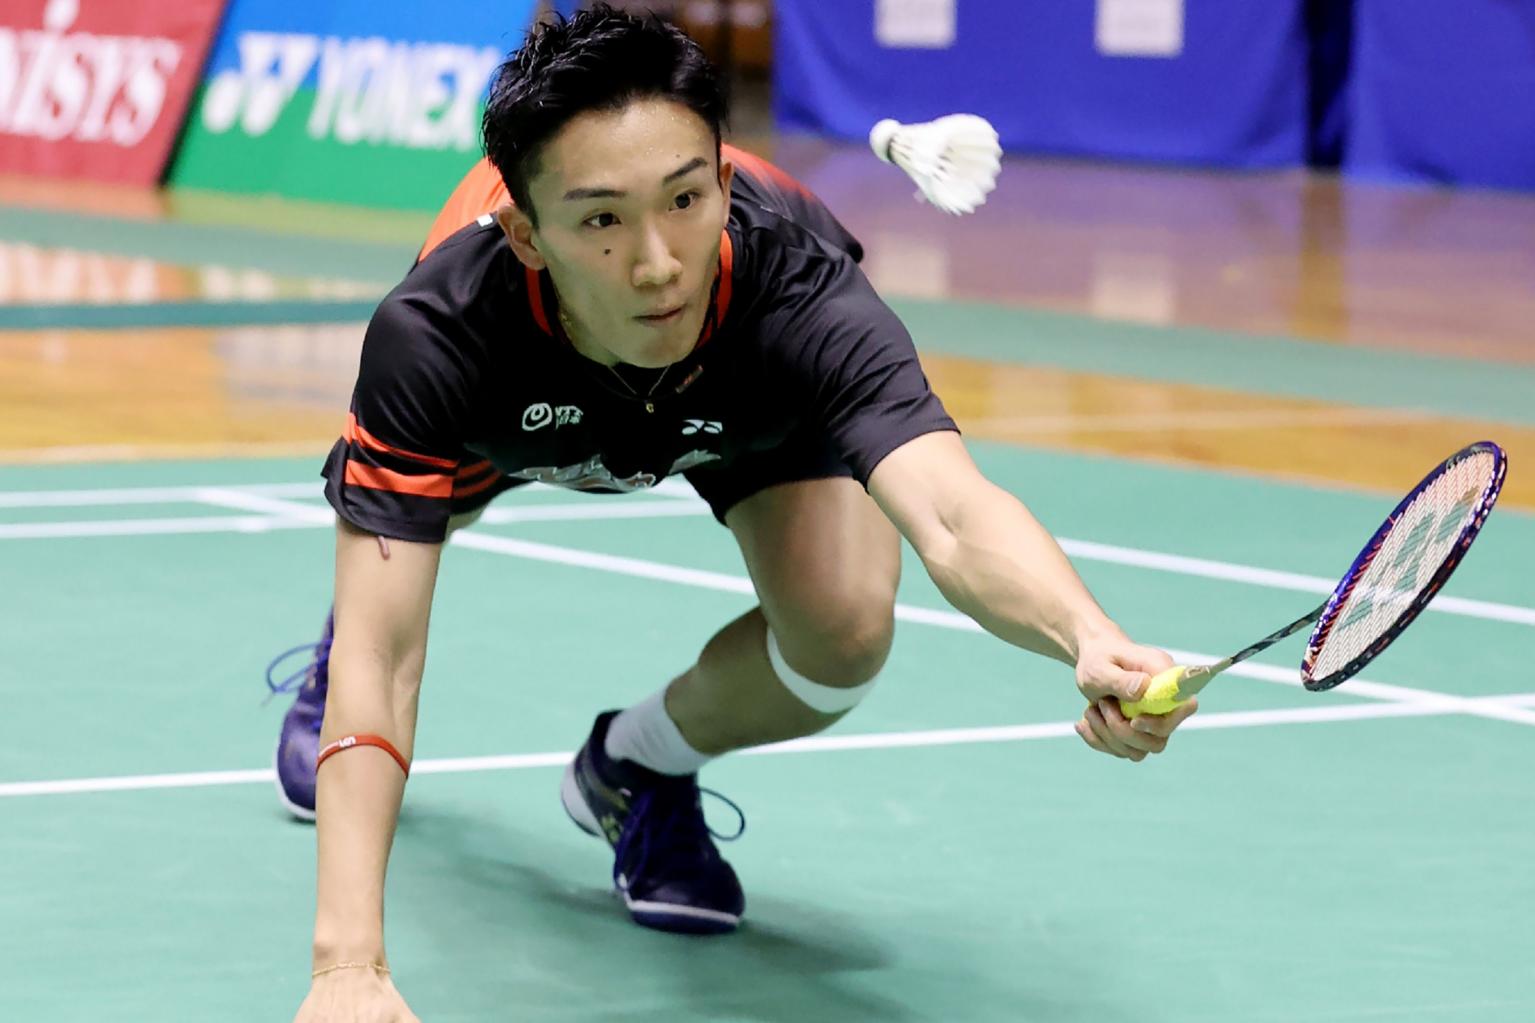 momota back from car crash with a win